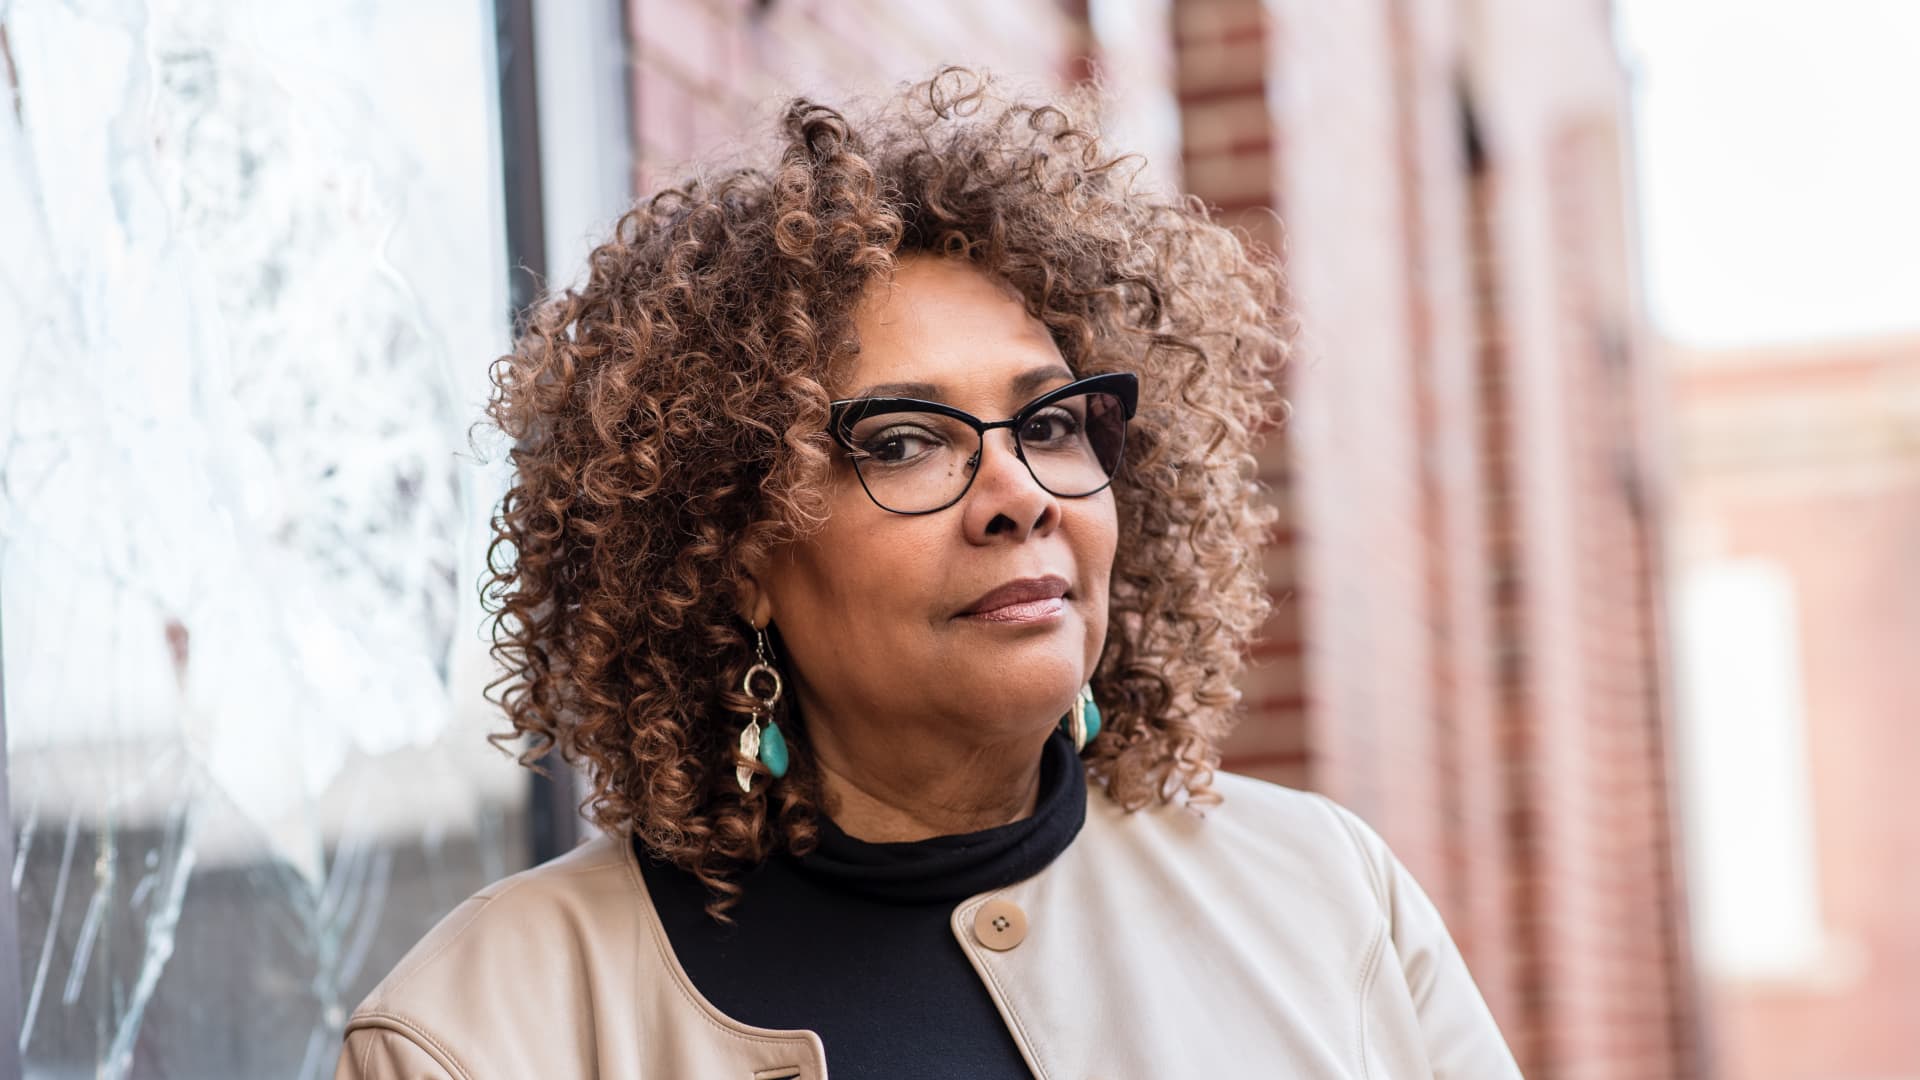 Renowned filmmaker Julie Dash, who wrote and directed the acclaimed film, 'Daughters of the Dust', teaches filmmaking at Howard University.